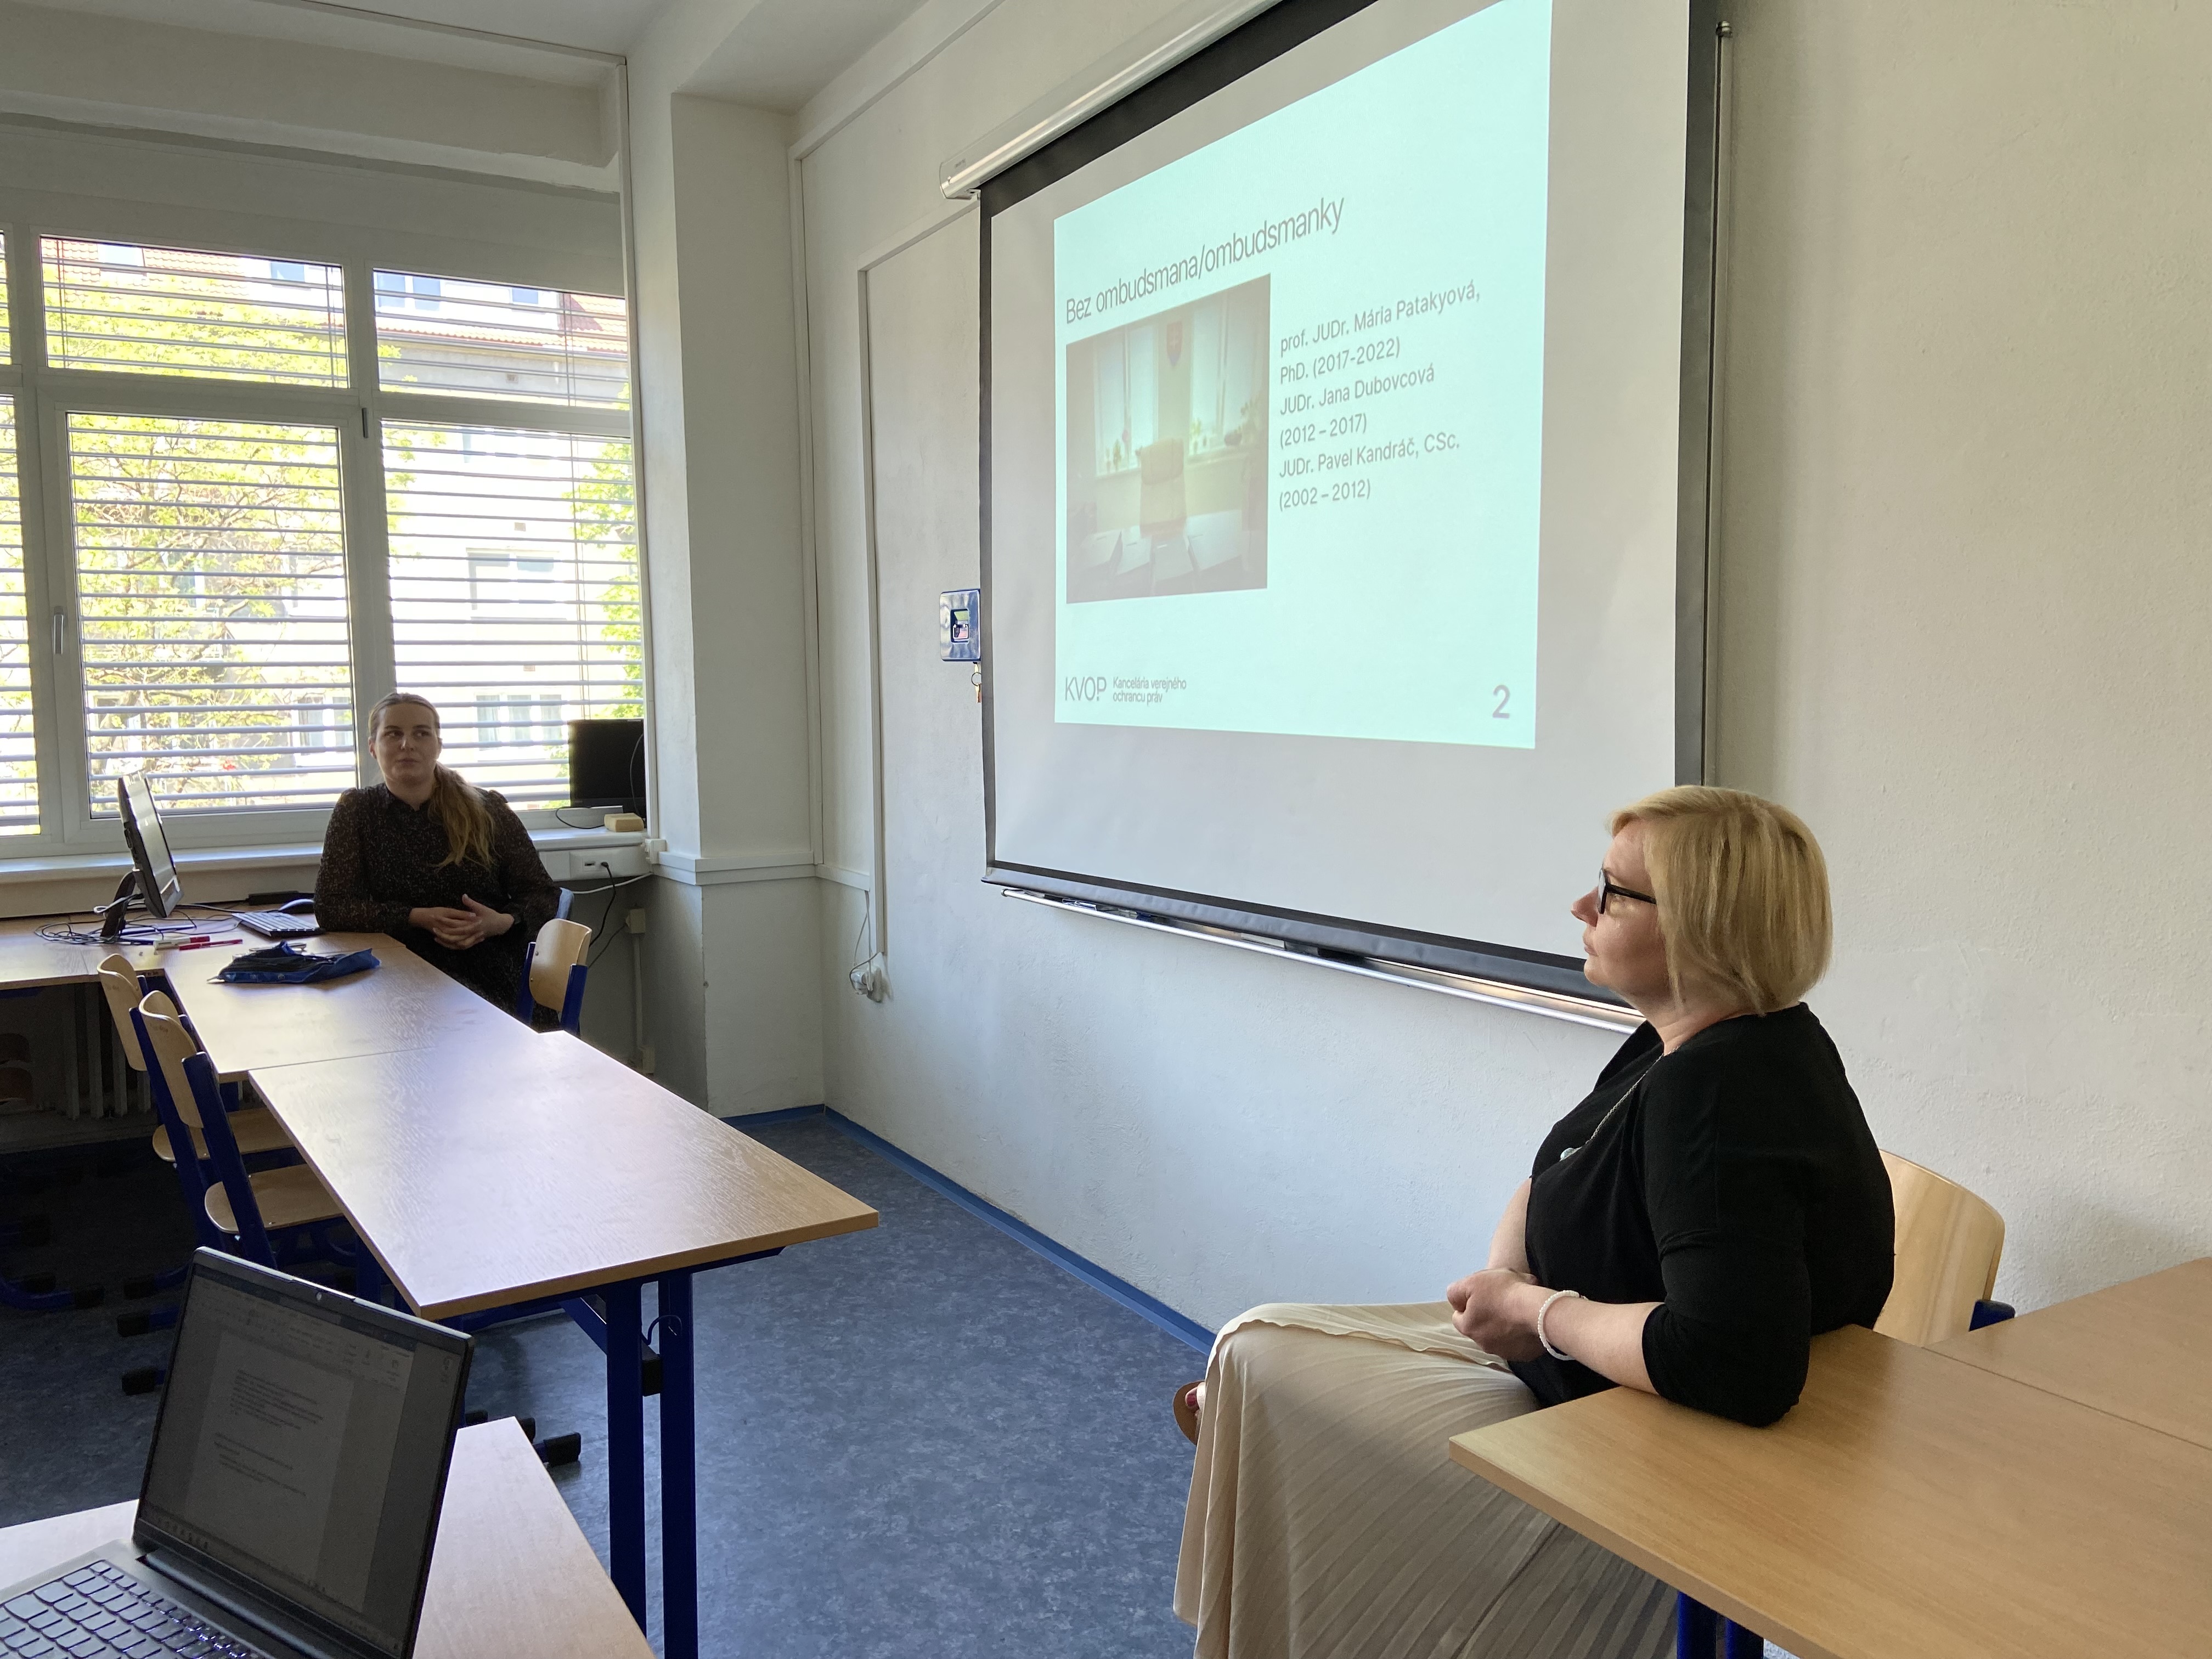 Comenius University Regional Academy – Discussing Women’s Rights in Childbirth.